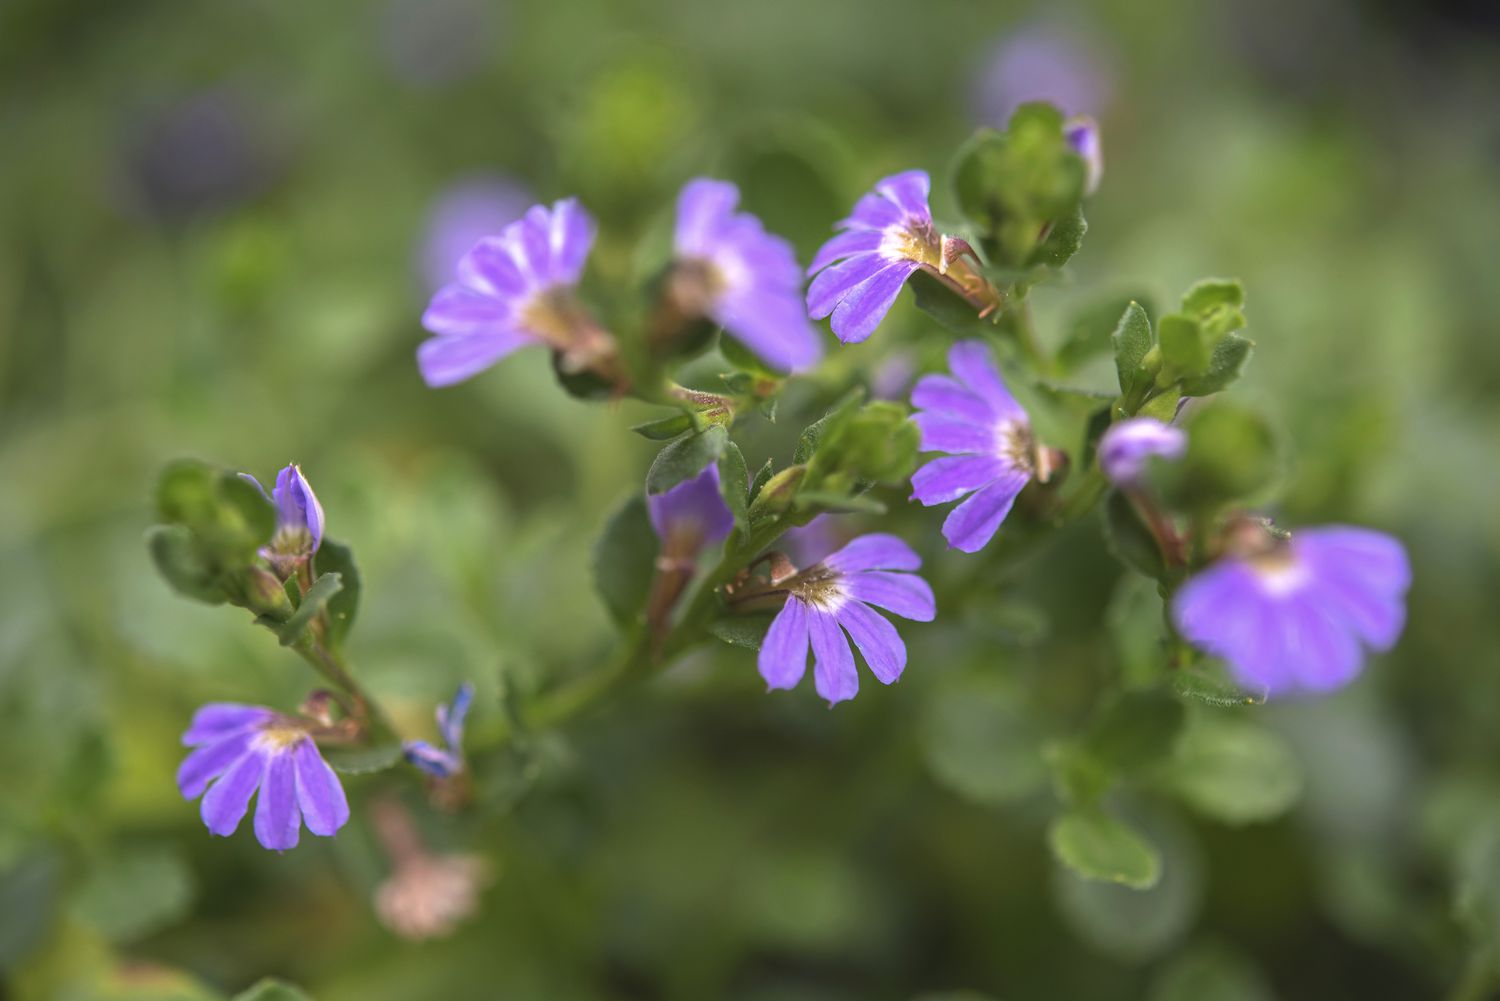 Scaevola plant with small purple flowers and leaves closeup